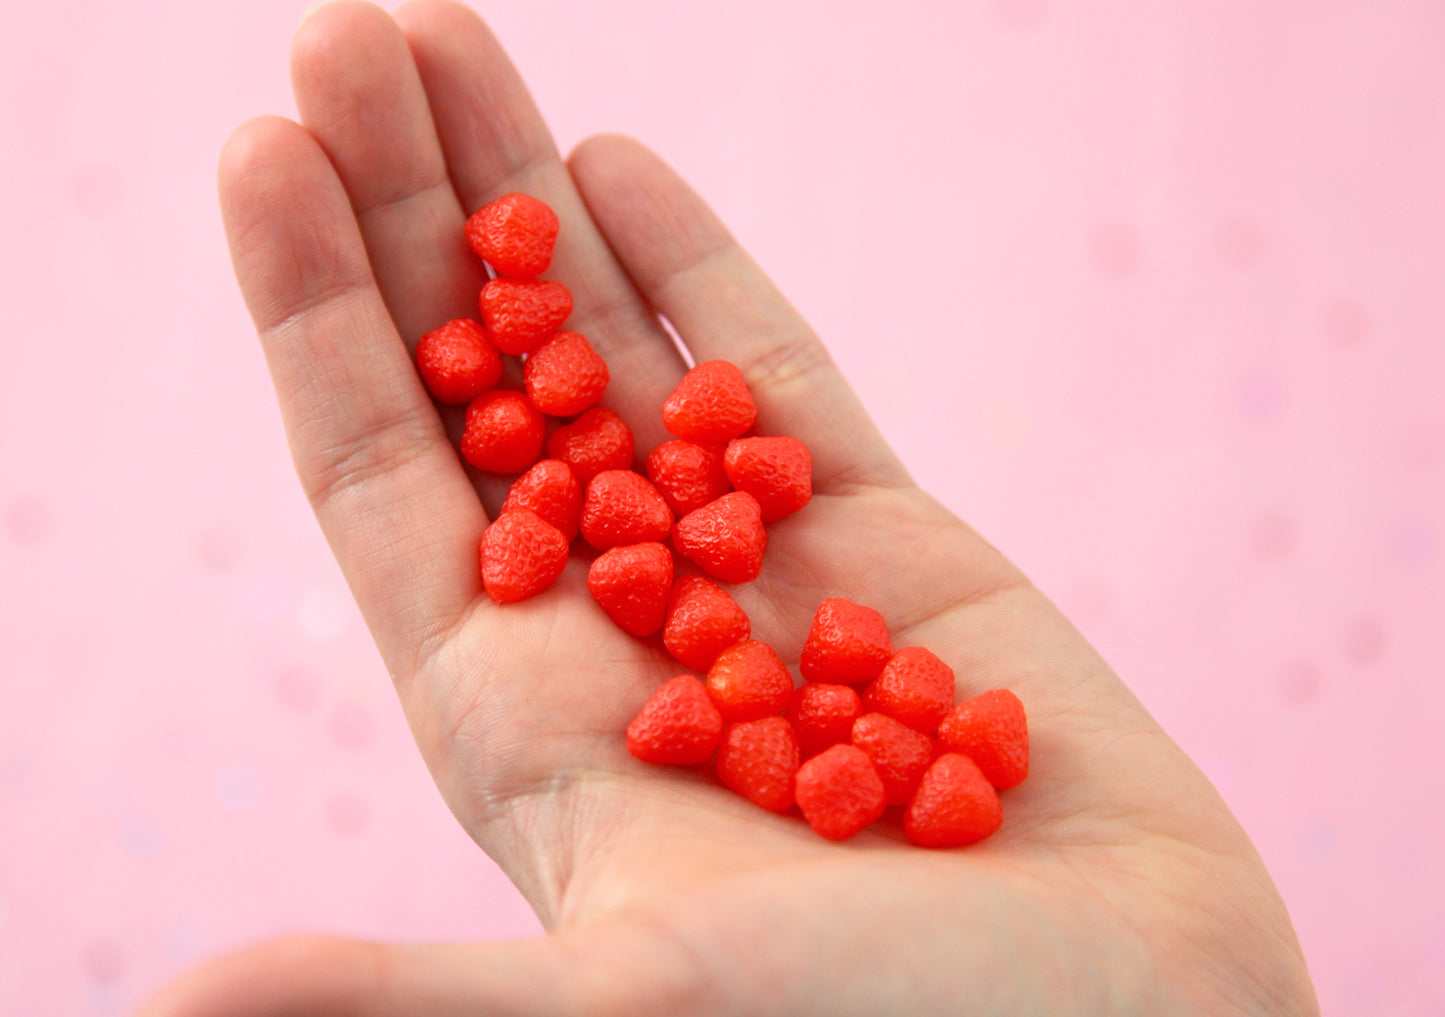 Fake Strawberries - 10mm Fake Strawberry Chunks Soft Squishy Silicone Berry Pieces or Resin Cabochons - 12 pc set